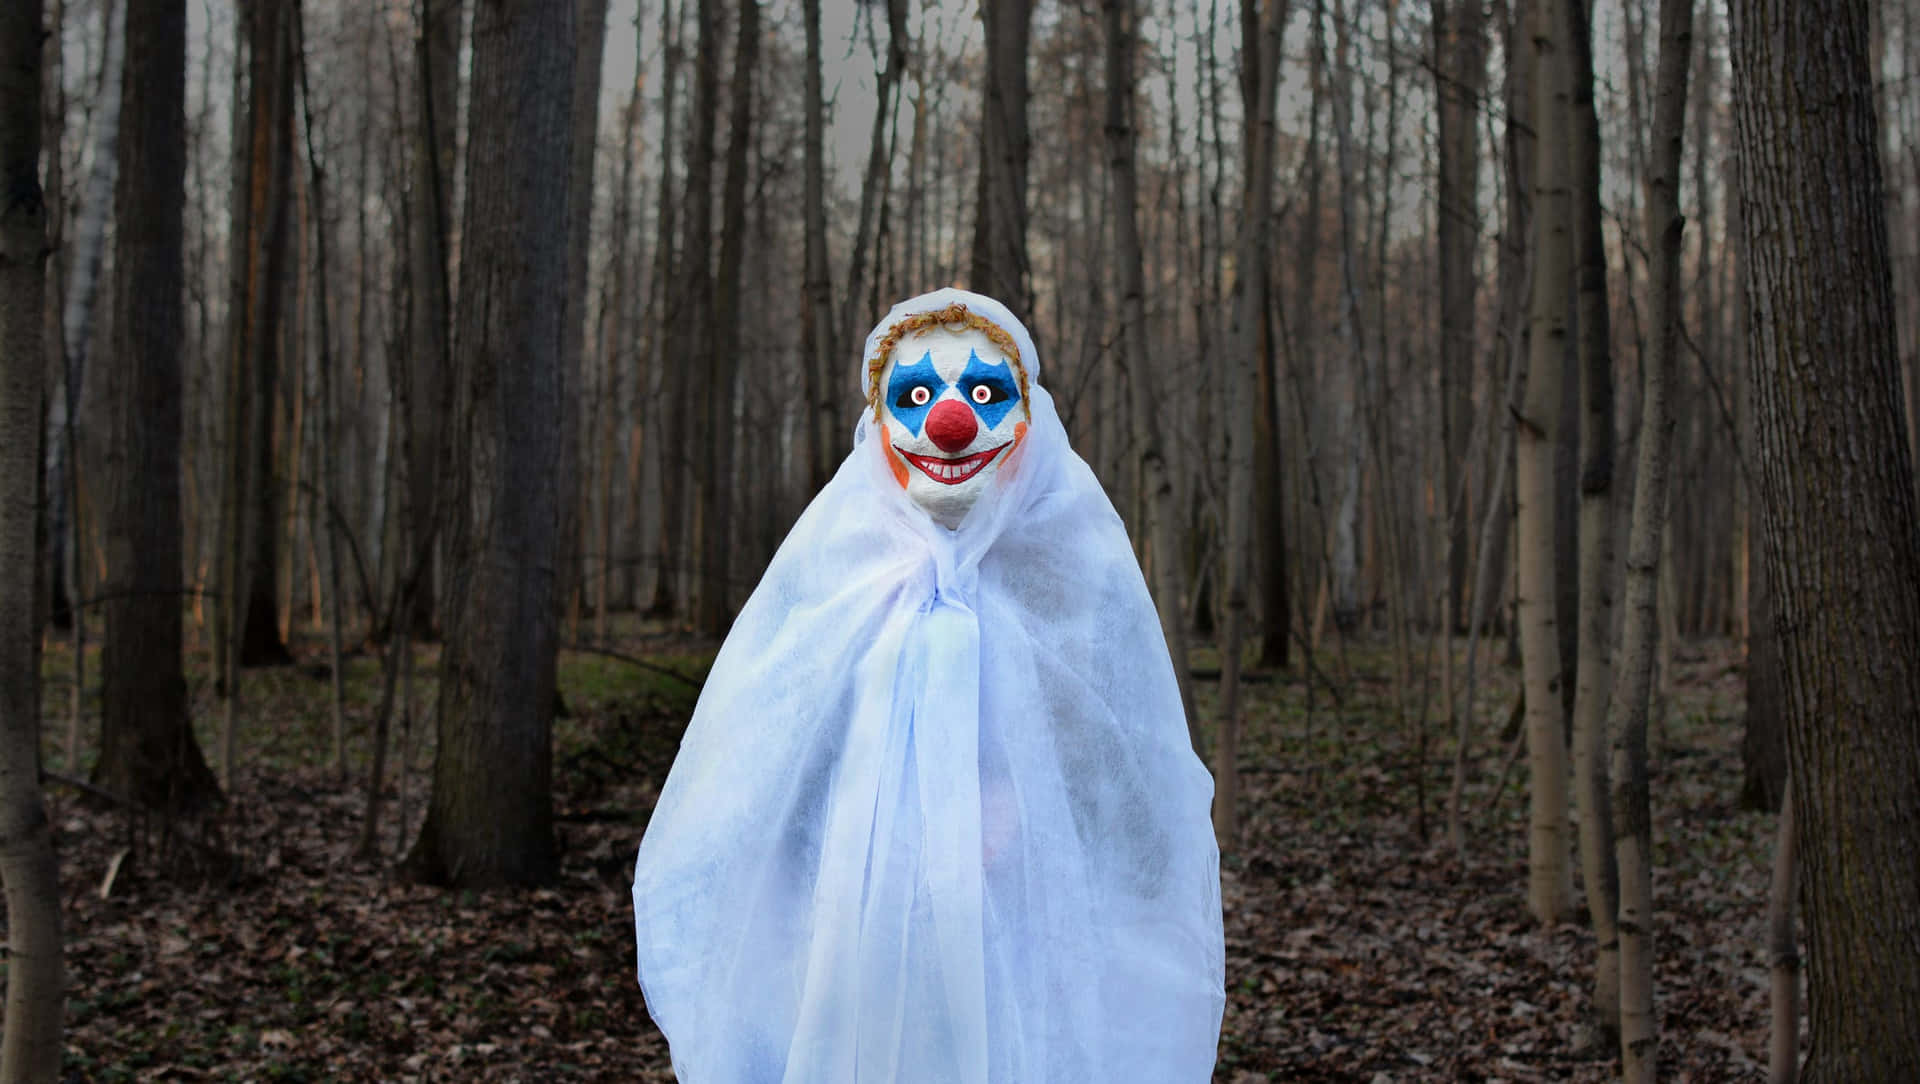 Scary Clown Creepy Forest Pictures